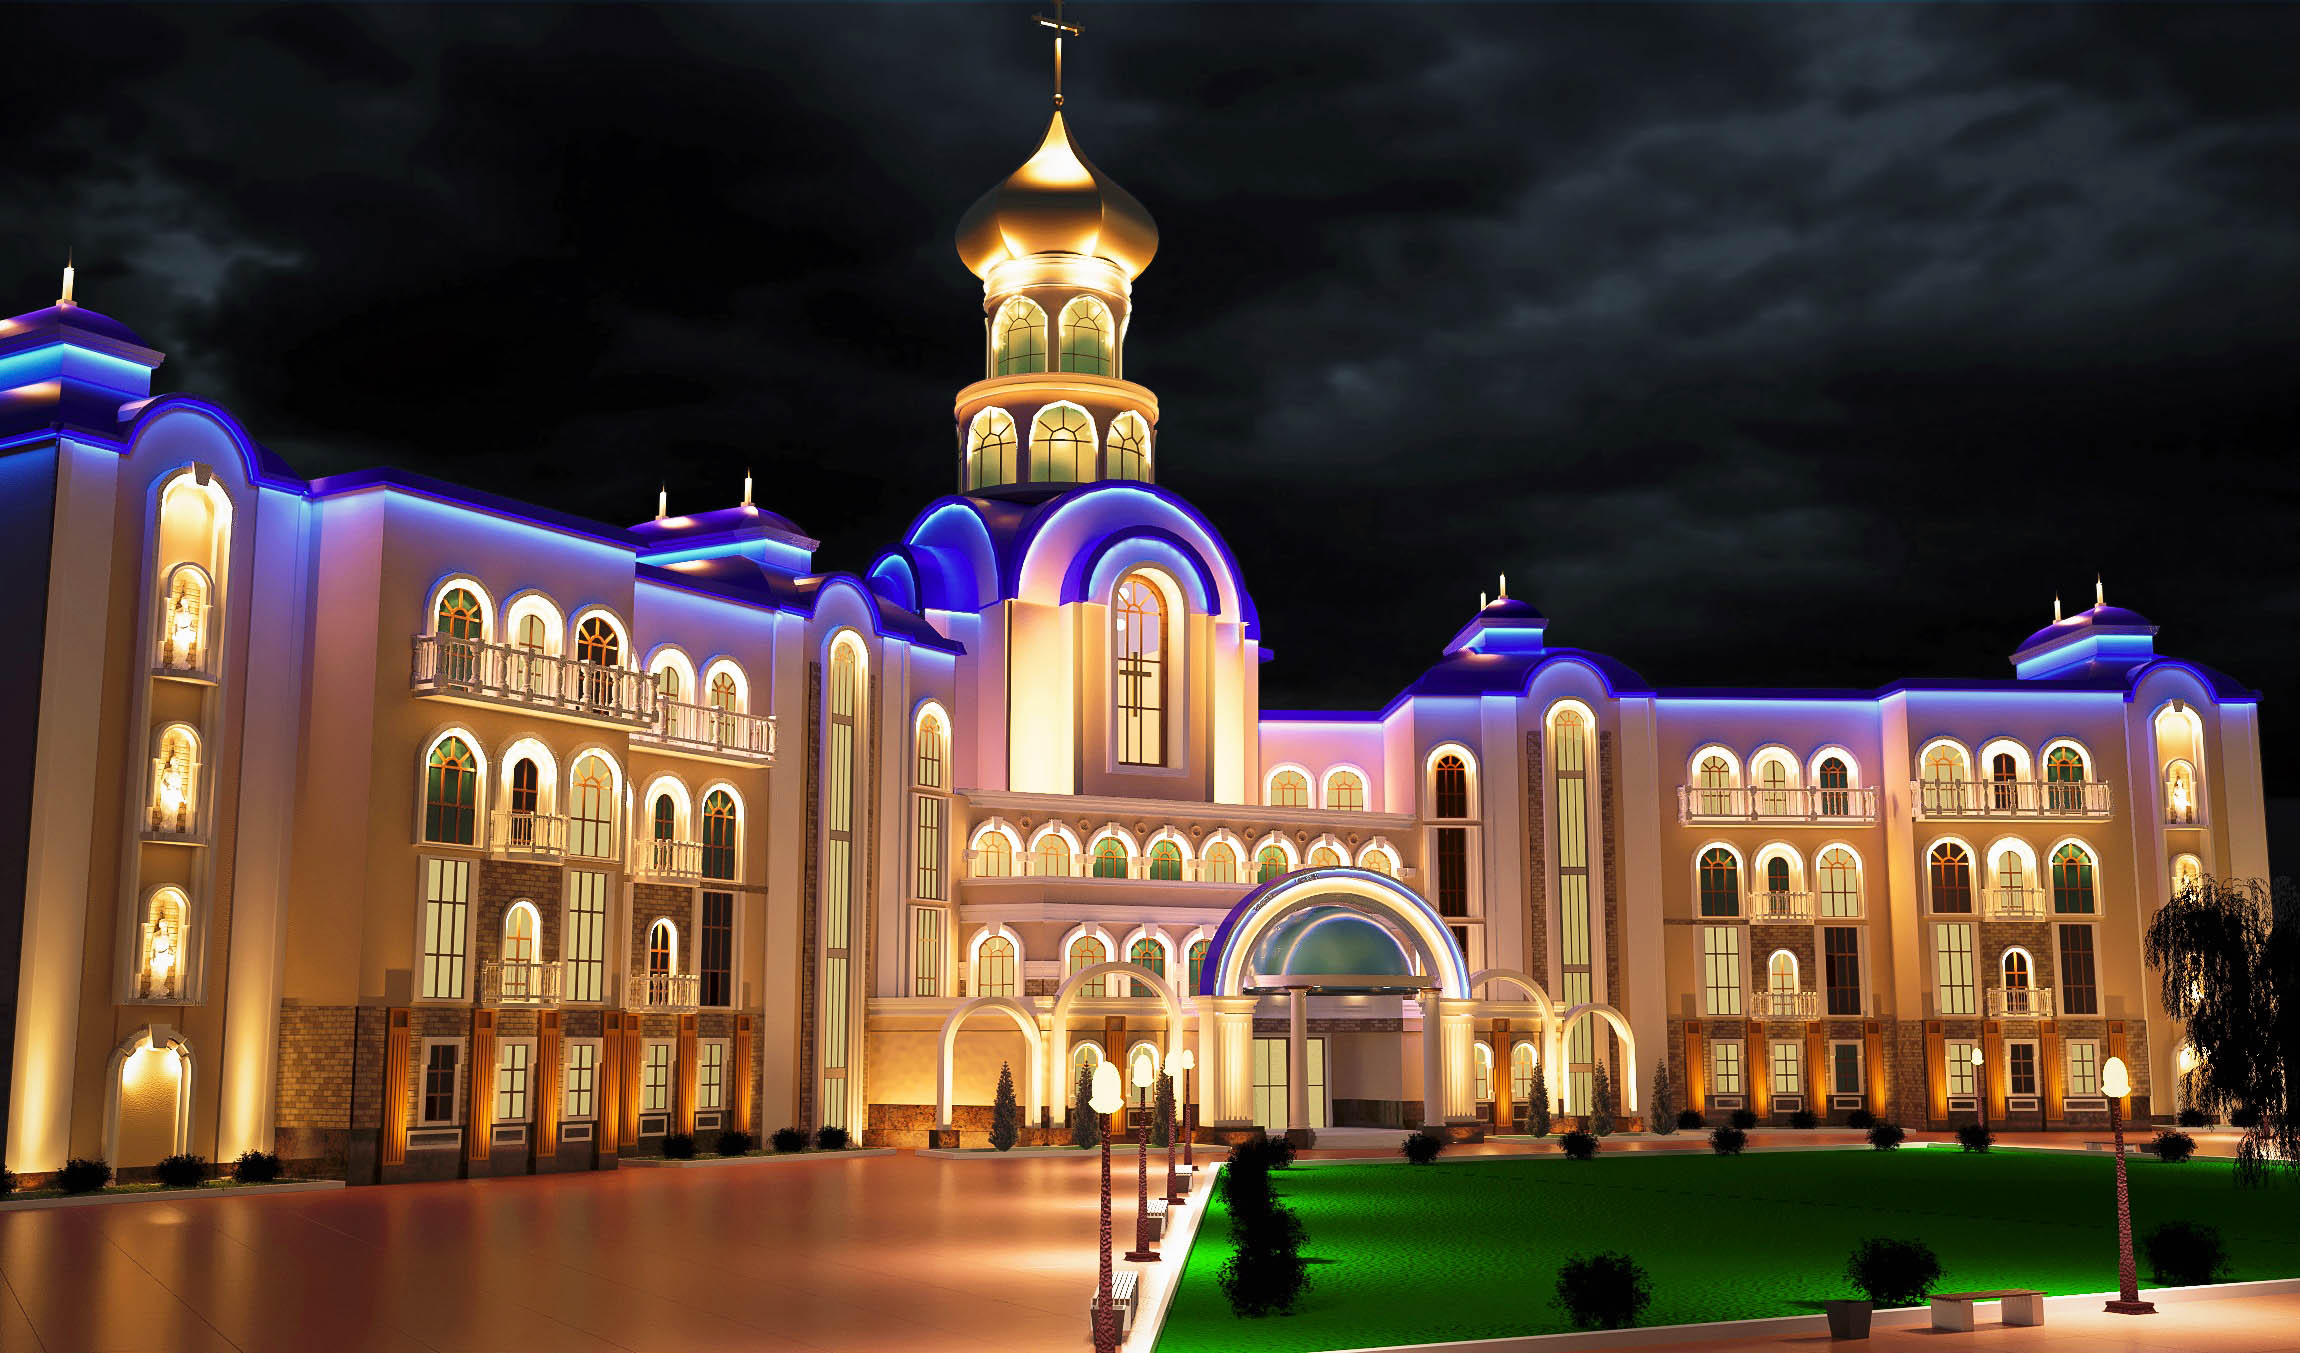 ODESSA CATHEDRAL SCHOOL (V-Ray) in 3d max vray 3.0 image